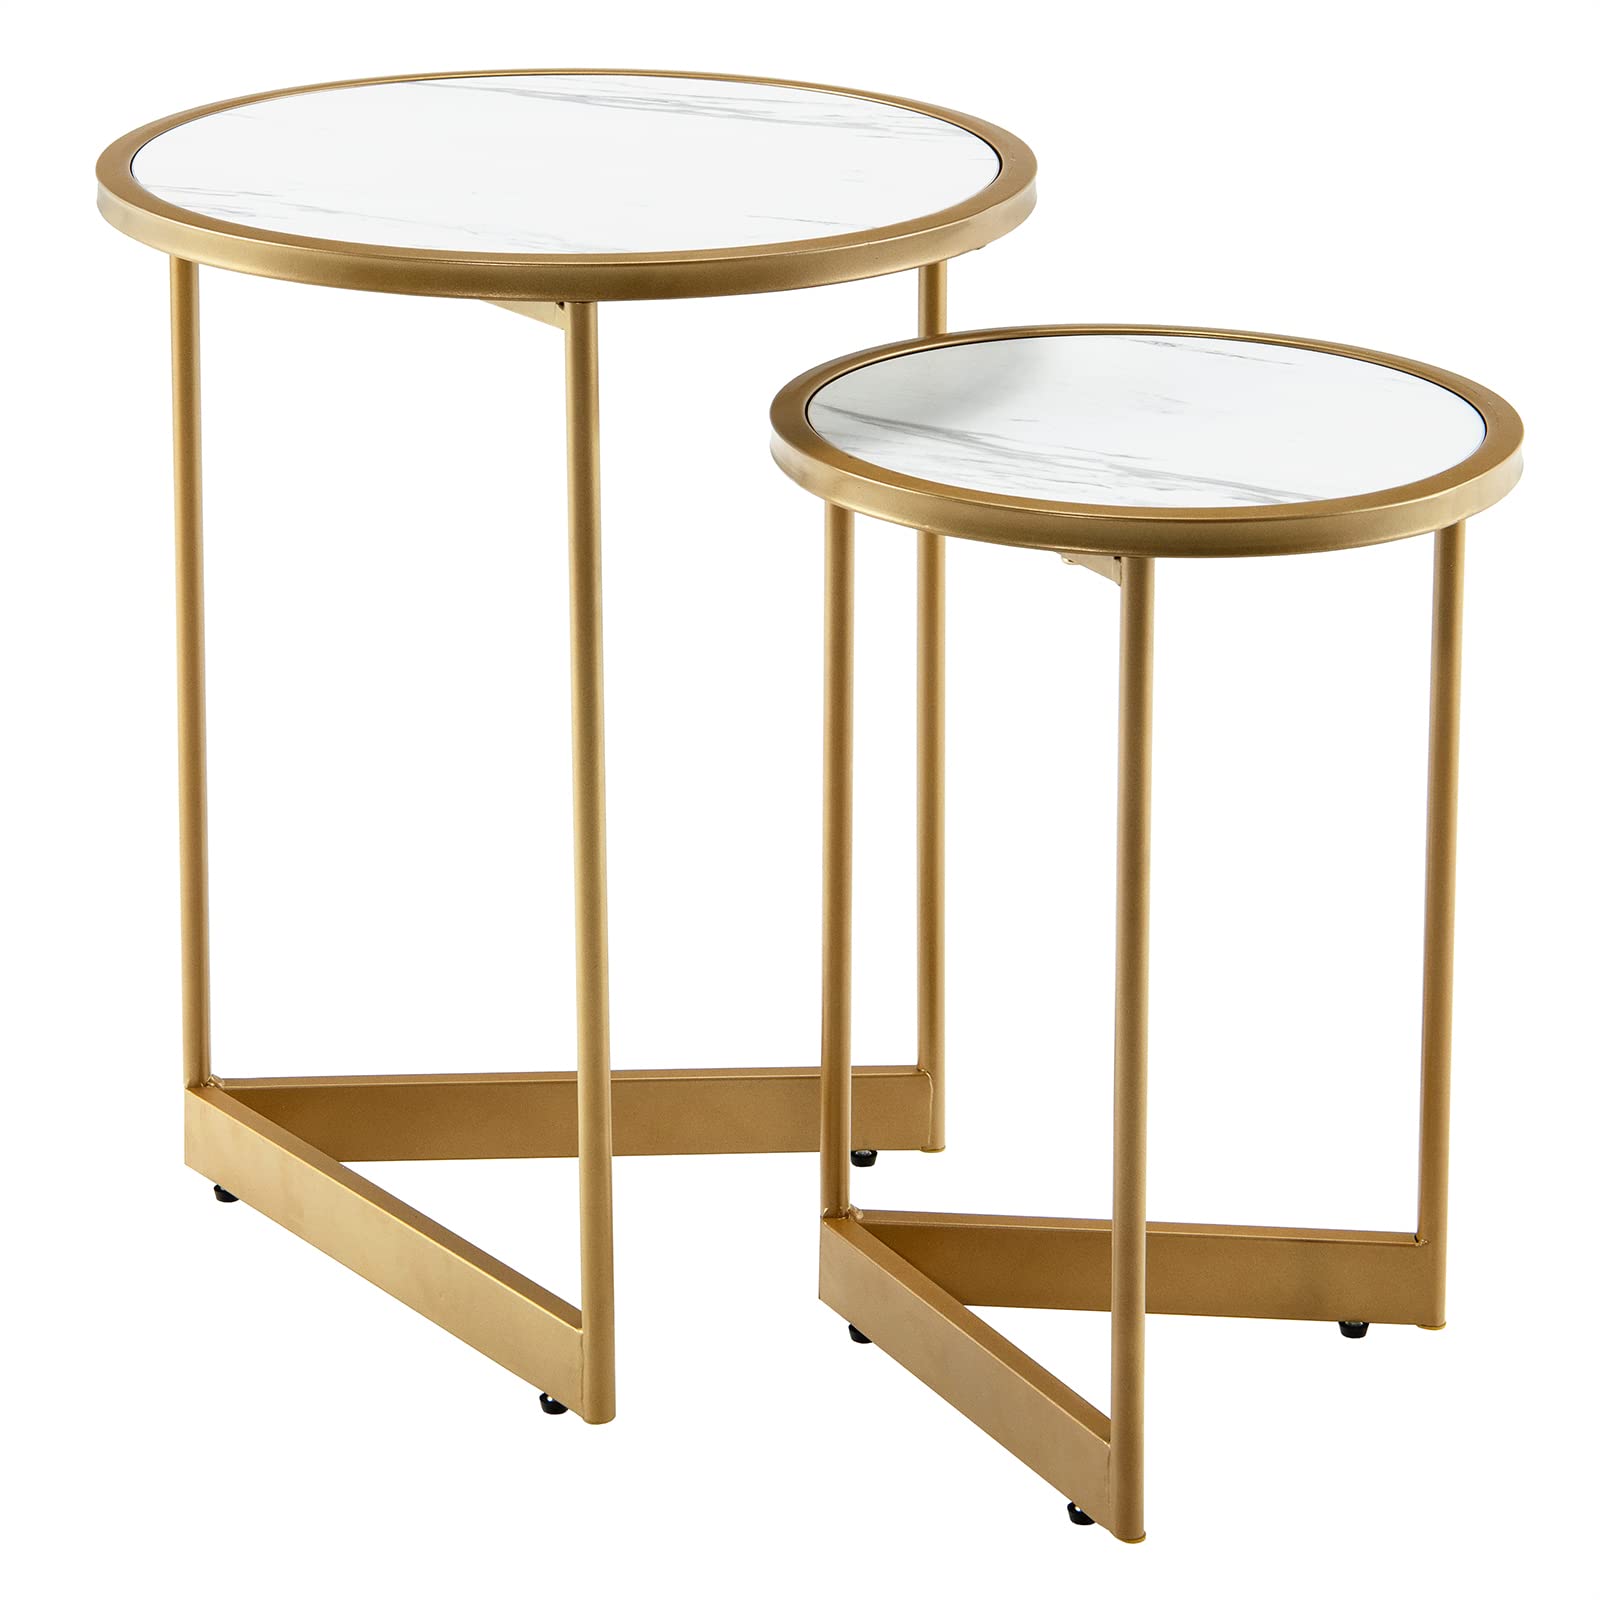 Giantex Round Nesting Table Set of 2, Modern Marble Texture Coffee Tables